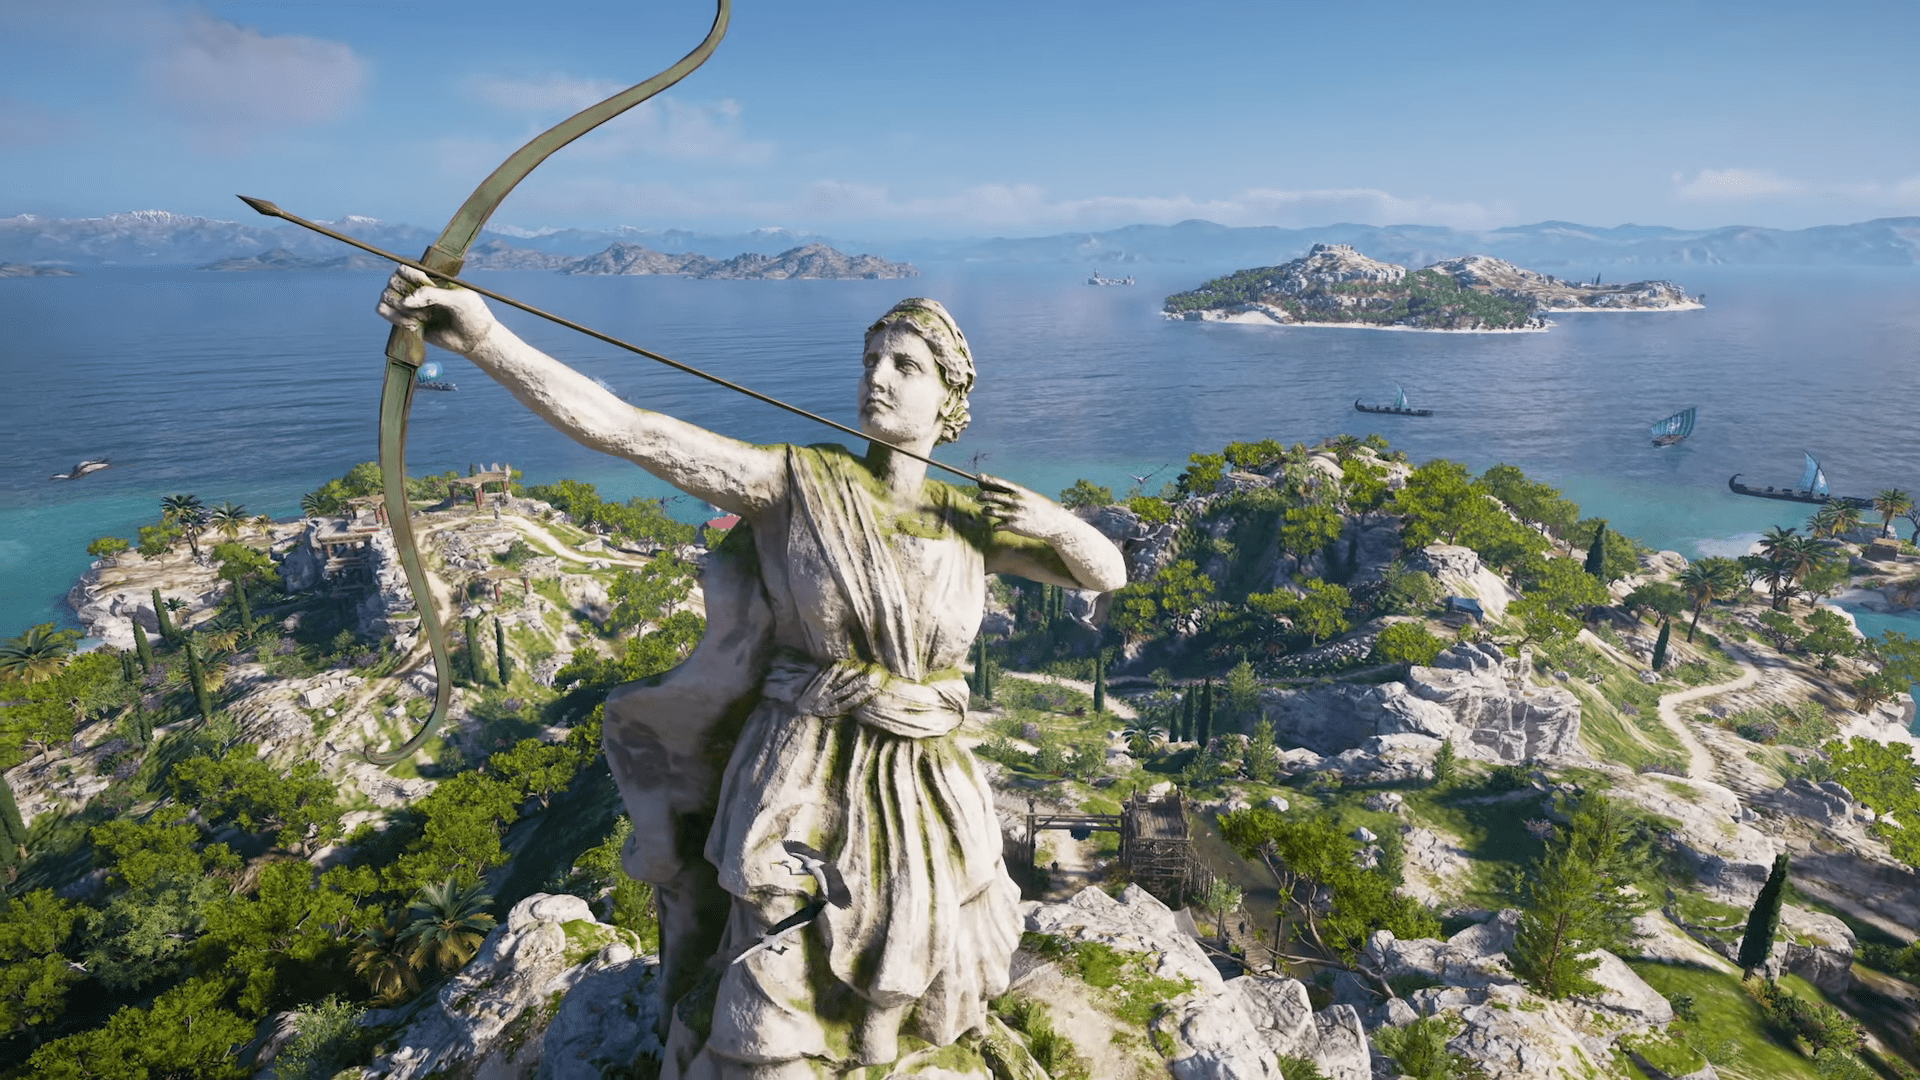 Ubisoft Is Holding A 5-Day Event For Assassin’s Creed Odyssey In Celebration Of The Game’s One Year Launch Anniversary